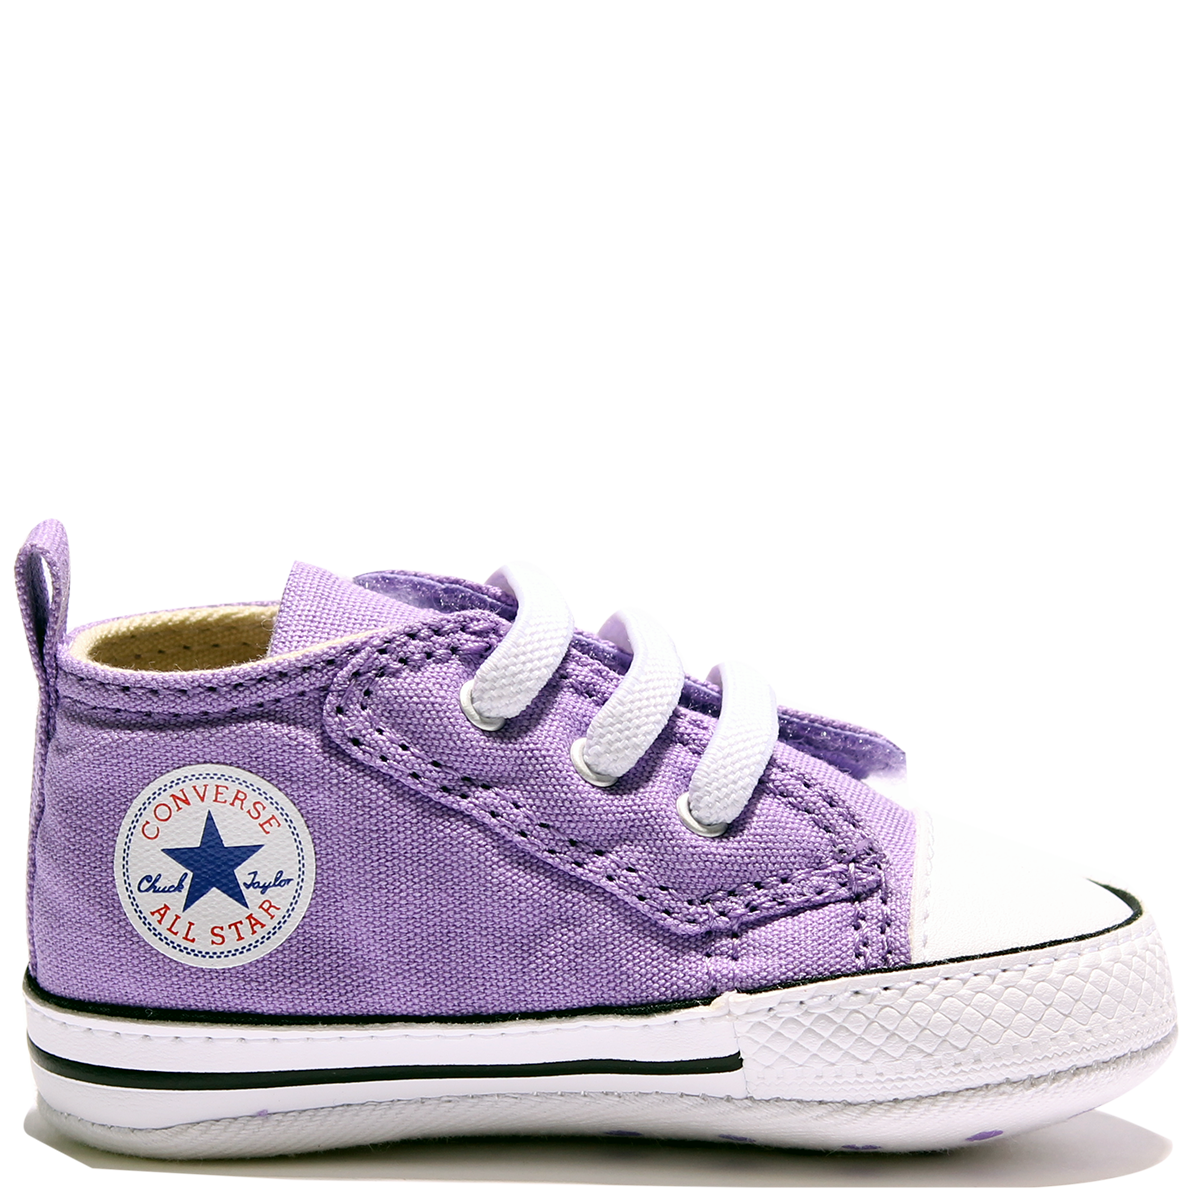 converse baby first star pink